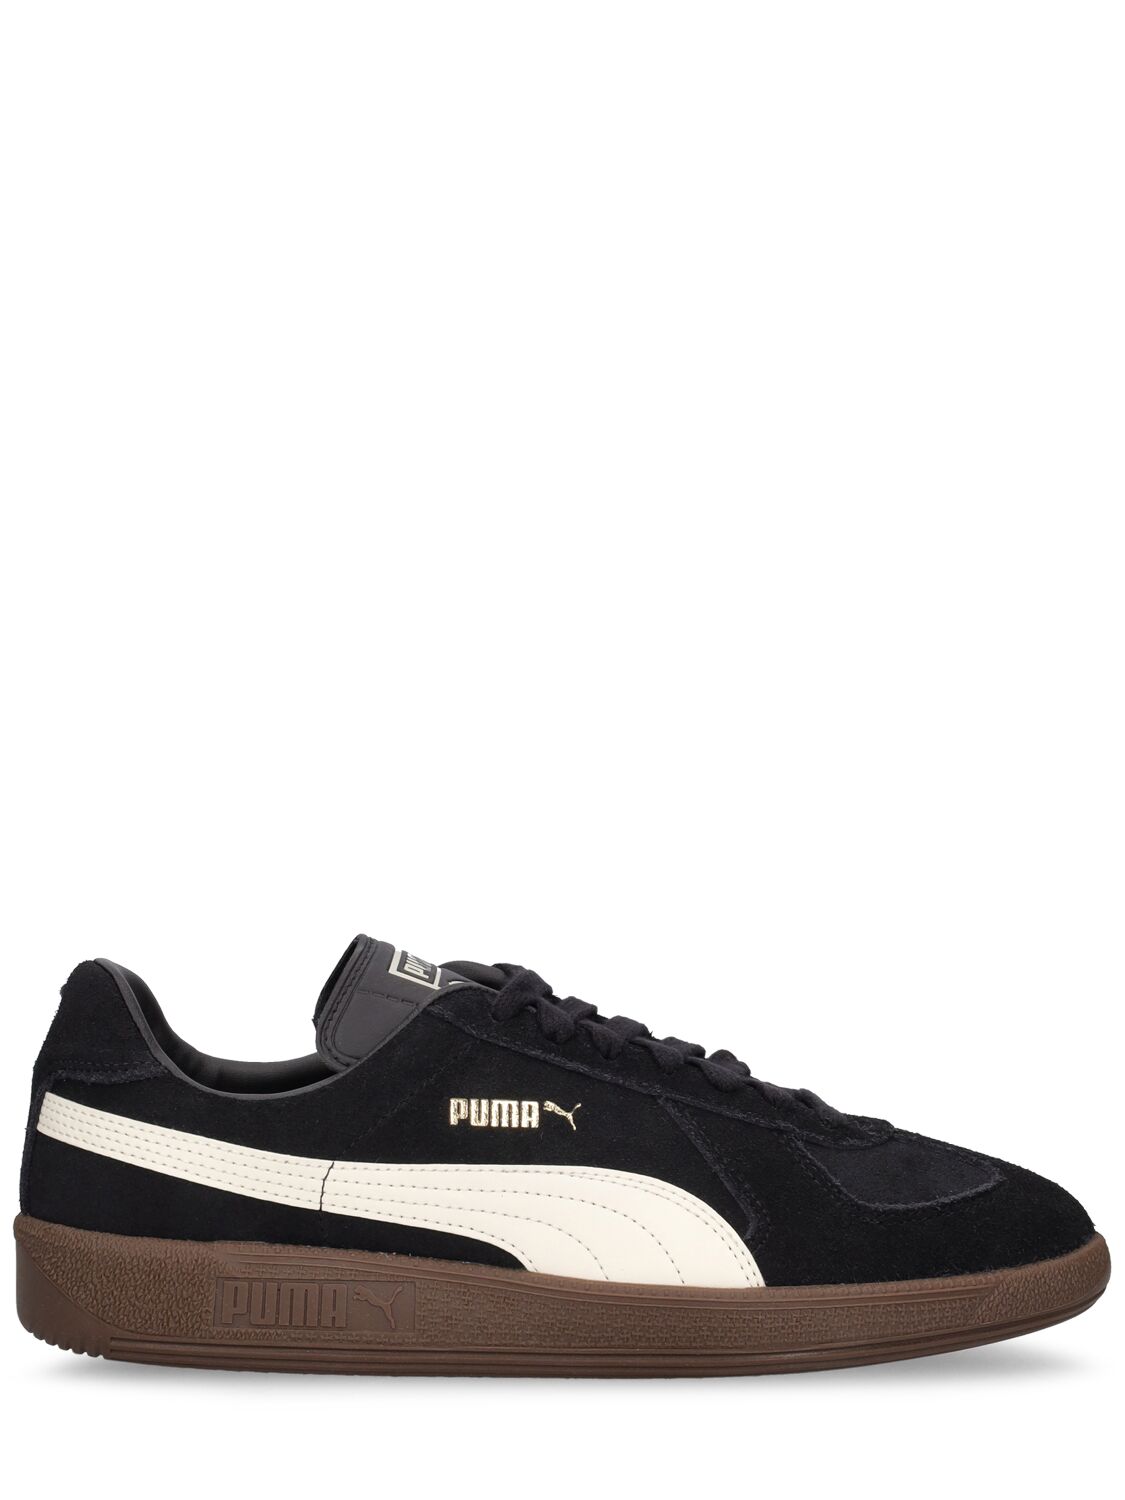 PUMA ARMY TRAINER SUEDE SNEAKERS